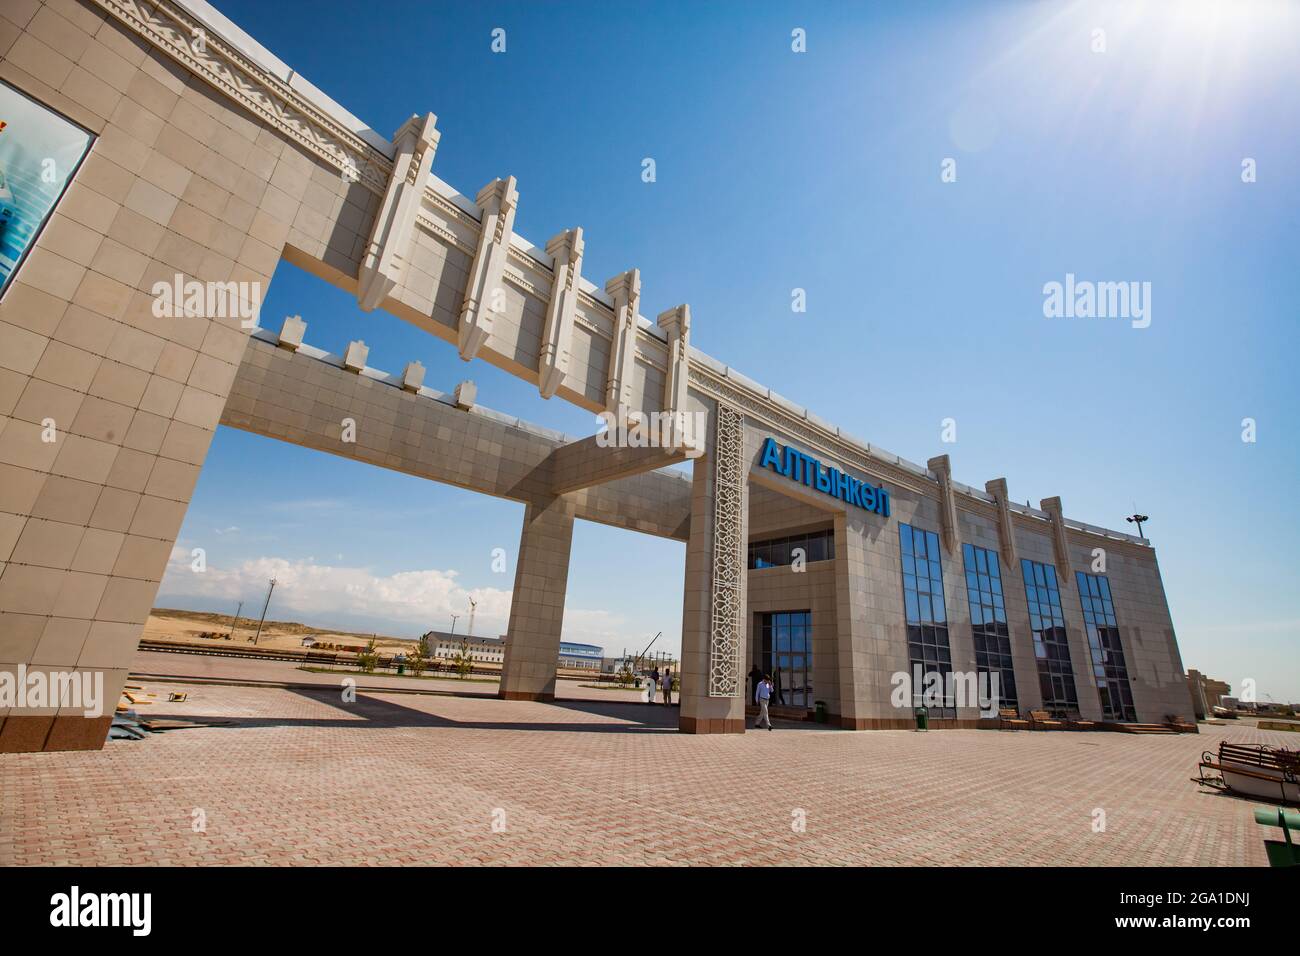 Altynkol, Kazakhstan - June 05, 2012: Railway station Altynkol. Down up panoramic view on building. Paving bricks floor. Blue station name letters. Bl Stock Photo